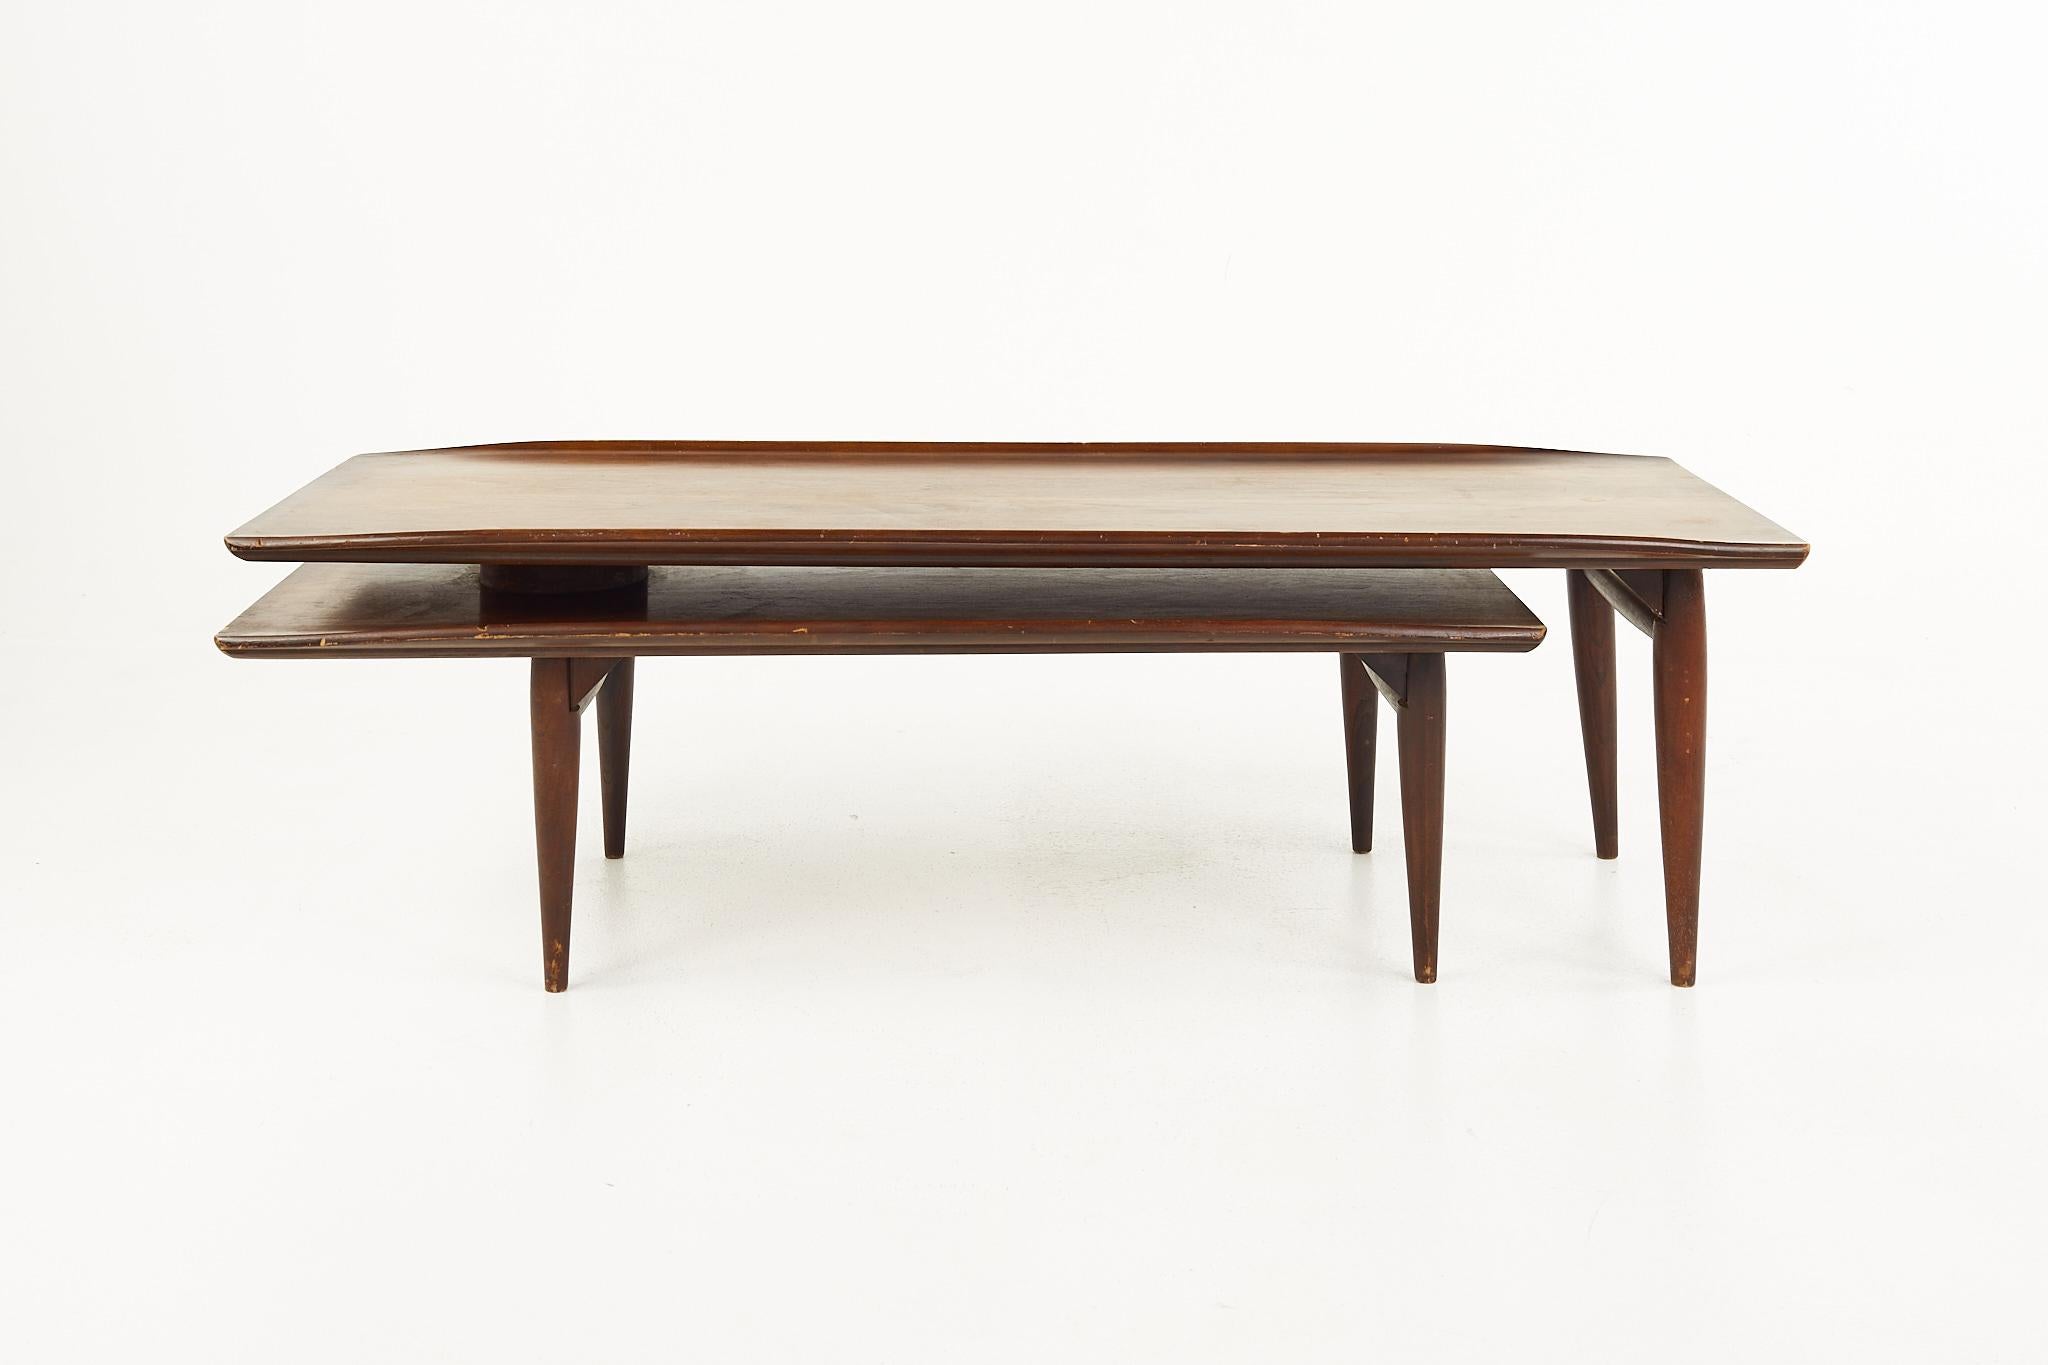 Bassett artisan mid century walnut switchblade coffee table

The coffee table measures: 51.25 wide x 20.5 deep x 15.5 inches high; when the table is expanded it measures 42.75 inches deep

All pieces of furniture can be had in what we call